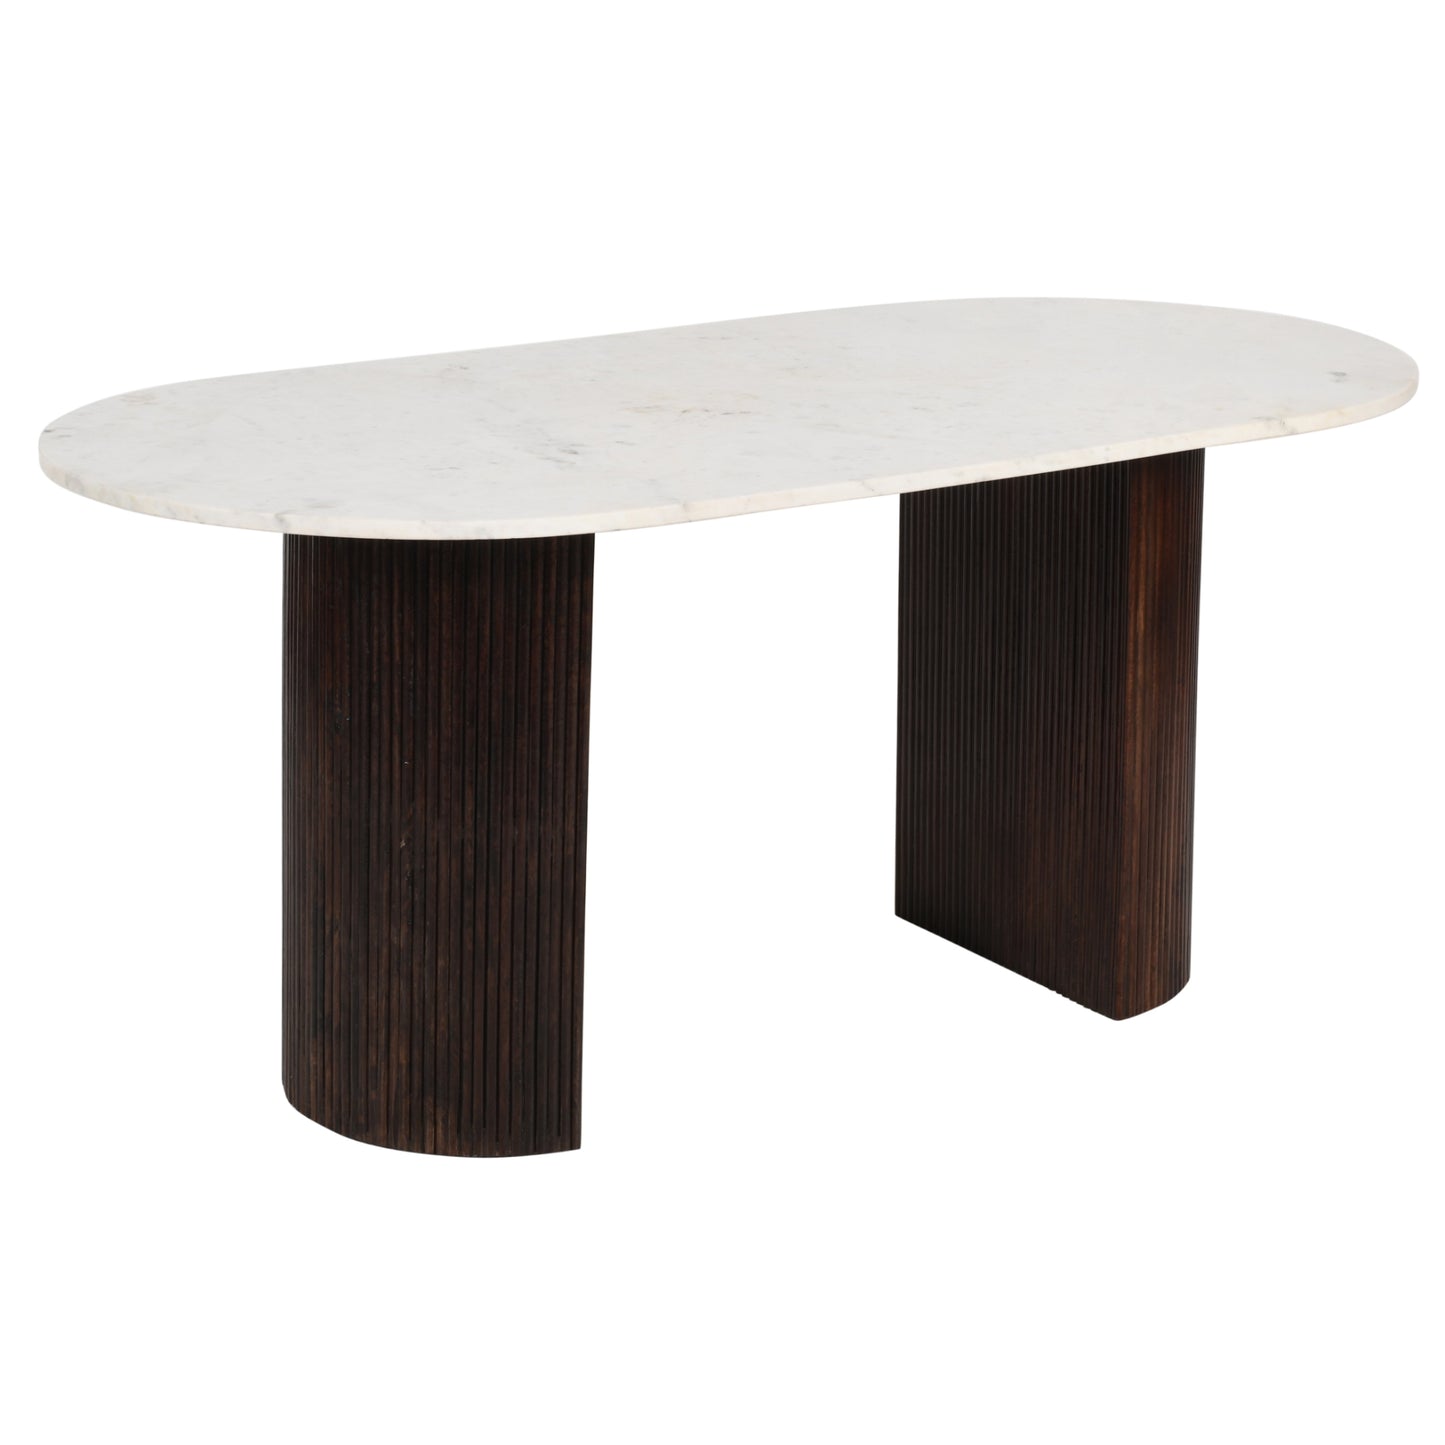 Opal Mango Wood Dining Table 170Cm With Marble Top